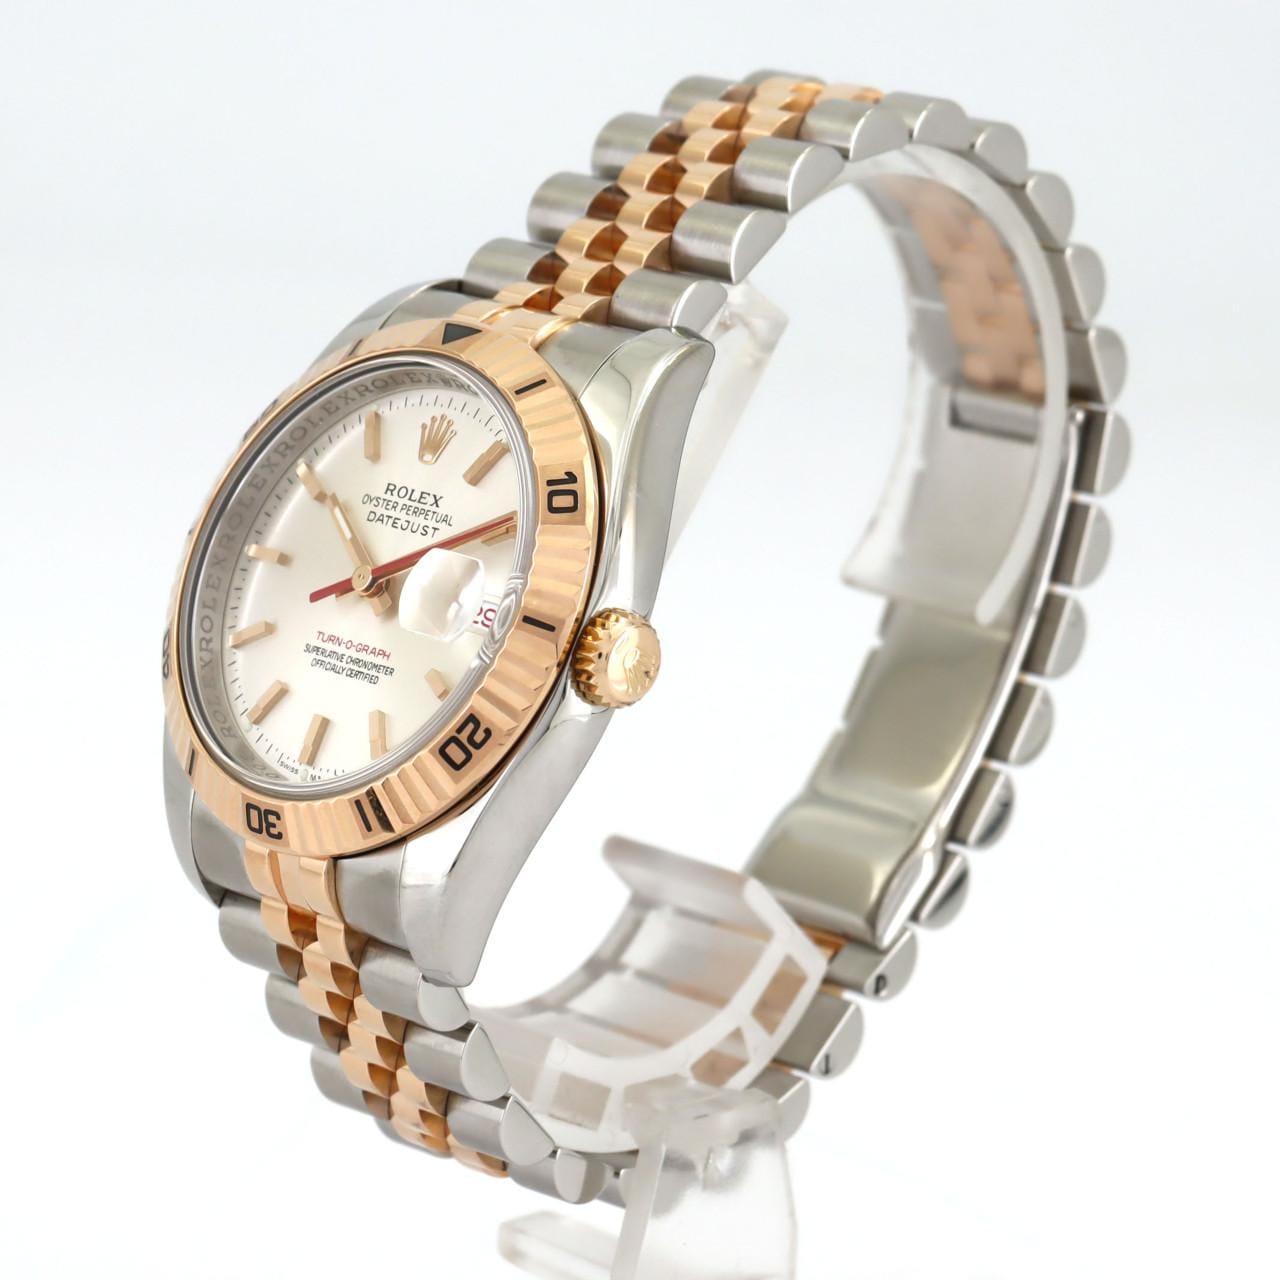 ROLEX Starnograph 116261･5 SSxPG Automatic F number